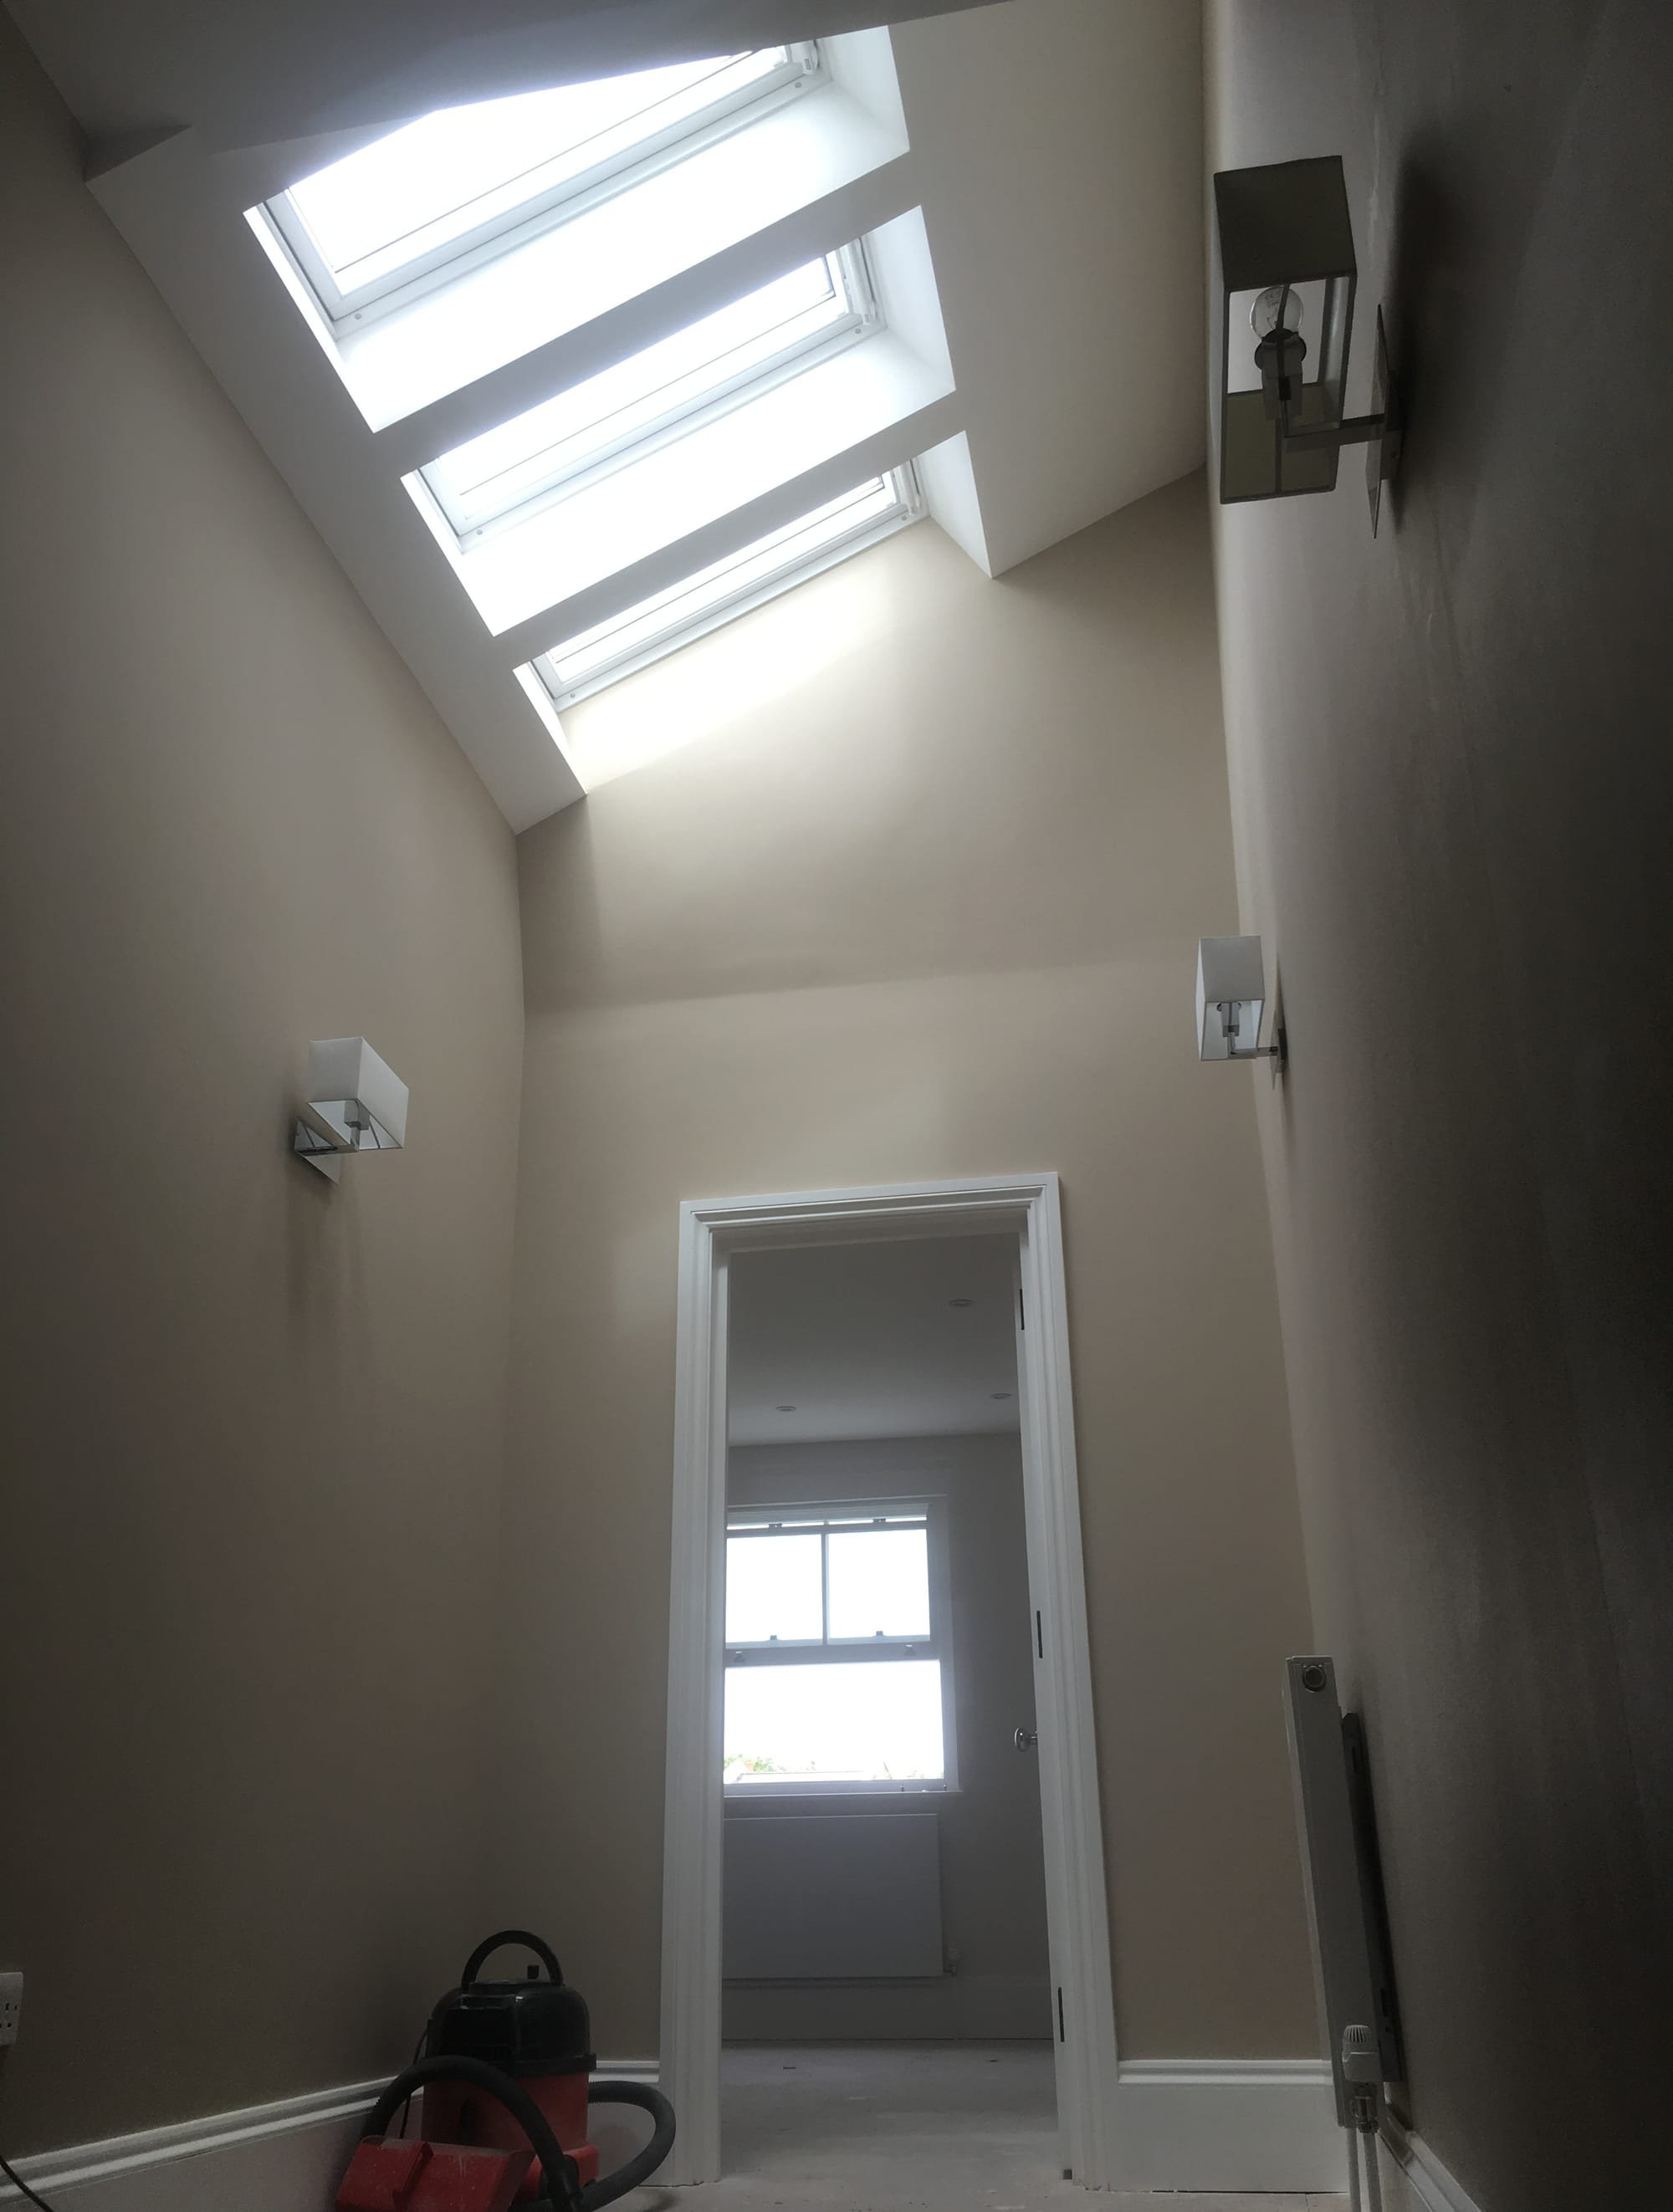 Velux flooding landing area outside bedroom of this SW12 rear loft conversion